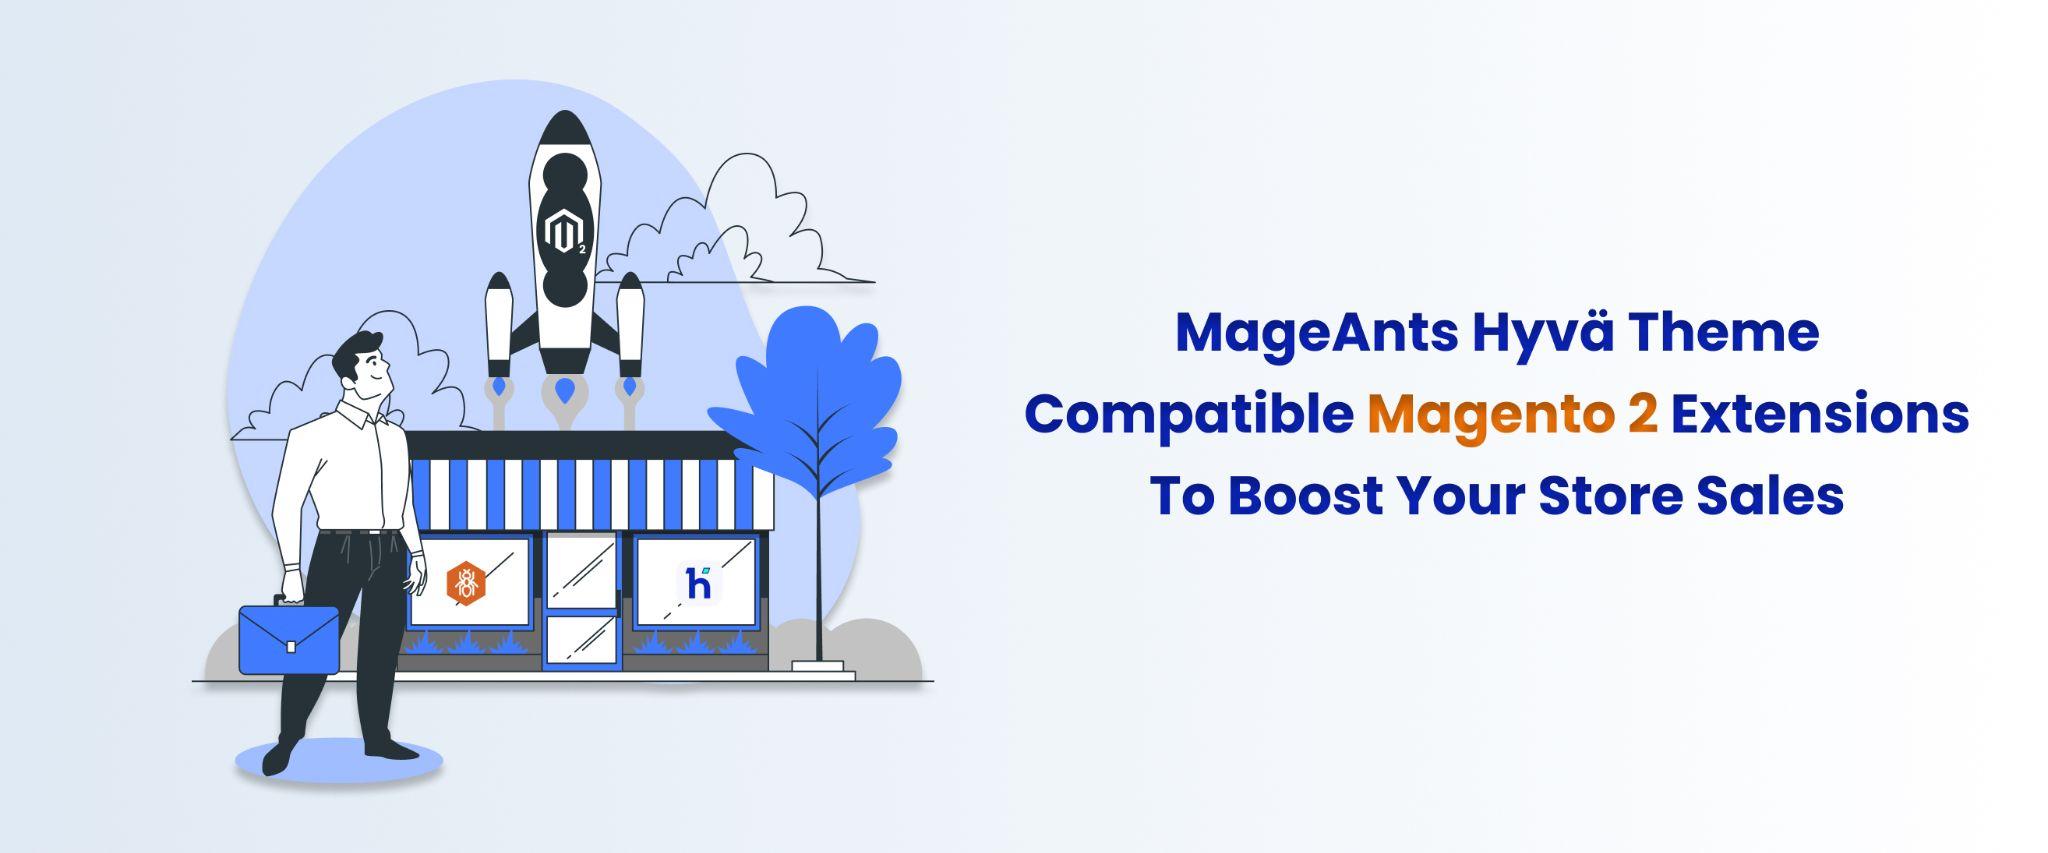 MageAnts Hyvä Theme Compatible Magento 2 Extensions To Boost Your Store Sales